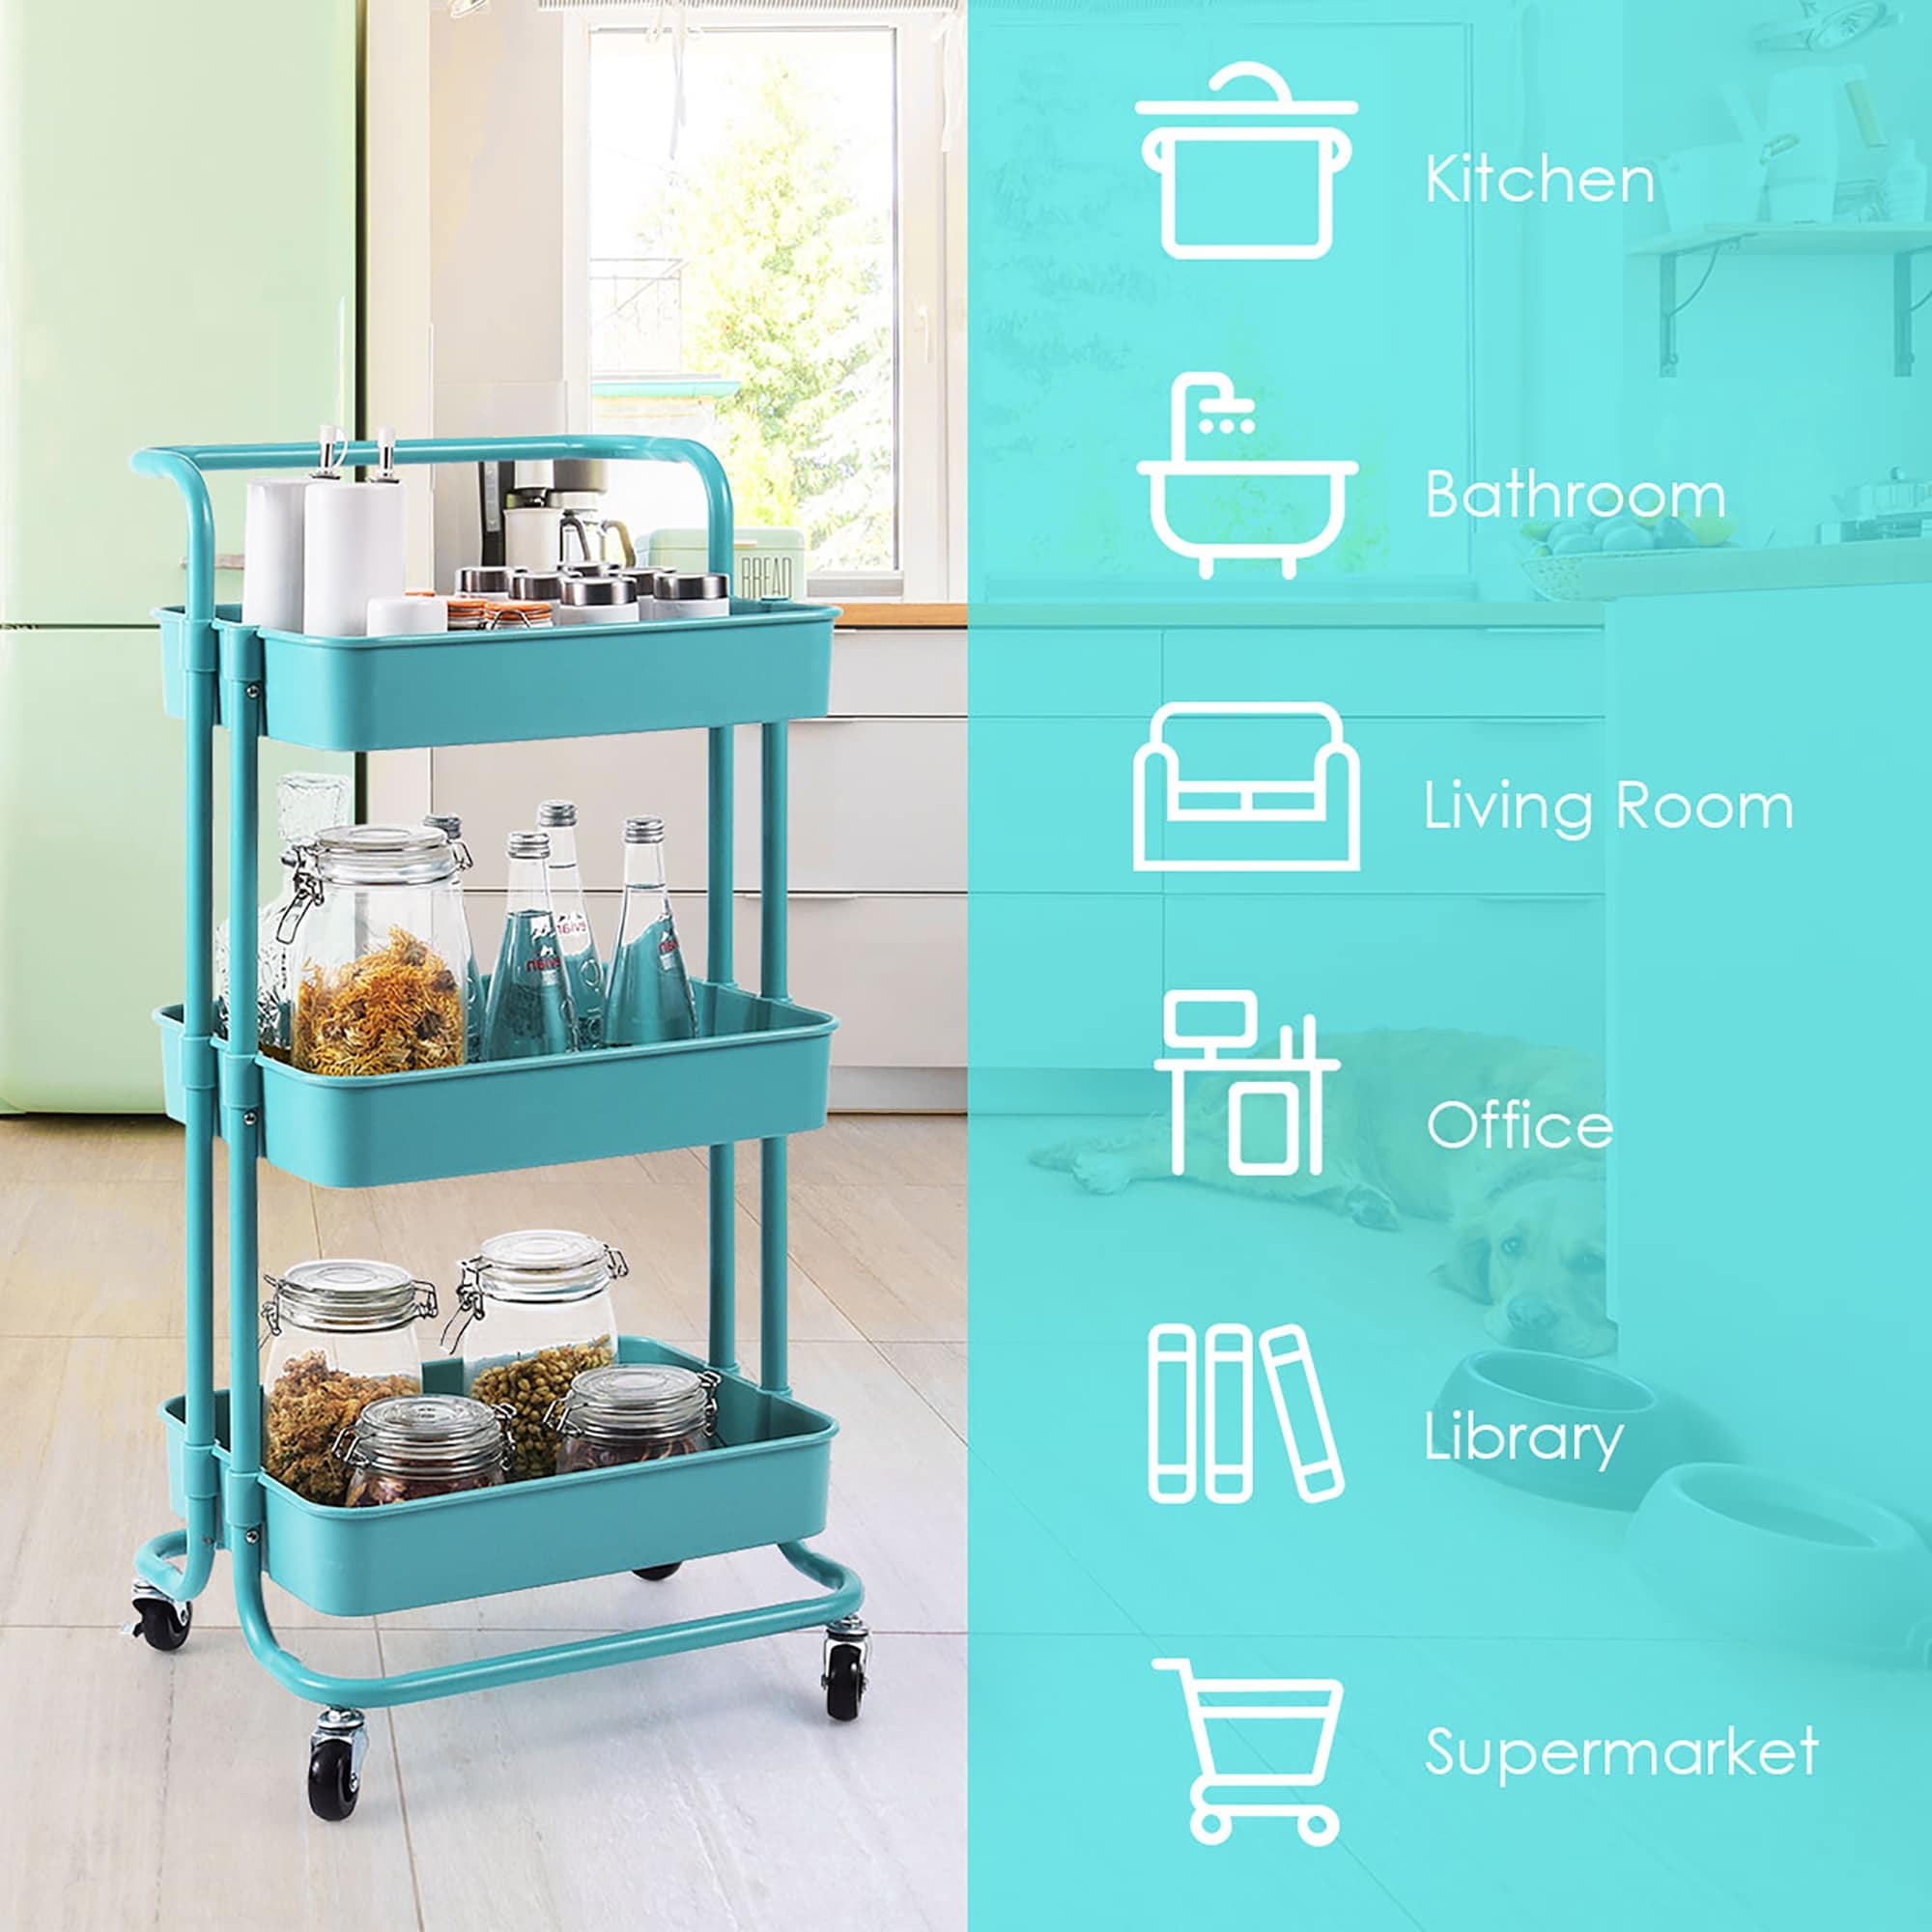 https://ak1.ostkcdn.com/images/products/is/images/direct/fcc279a3dde0ceb01fd48ba07b26a0d2e36b5e5e/3-Tier-Utility-Cart-Storage-Rolling-Cart-with-Casters.jpg